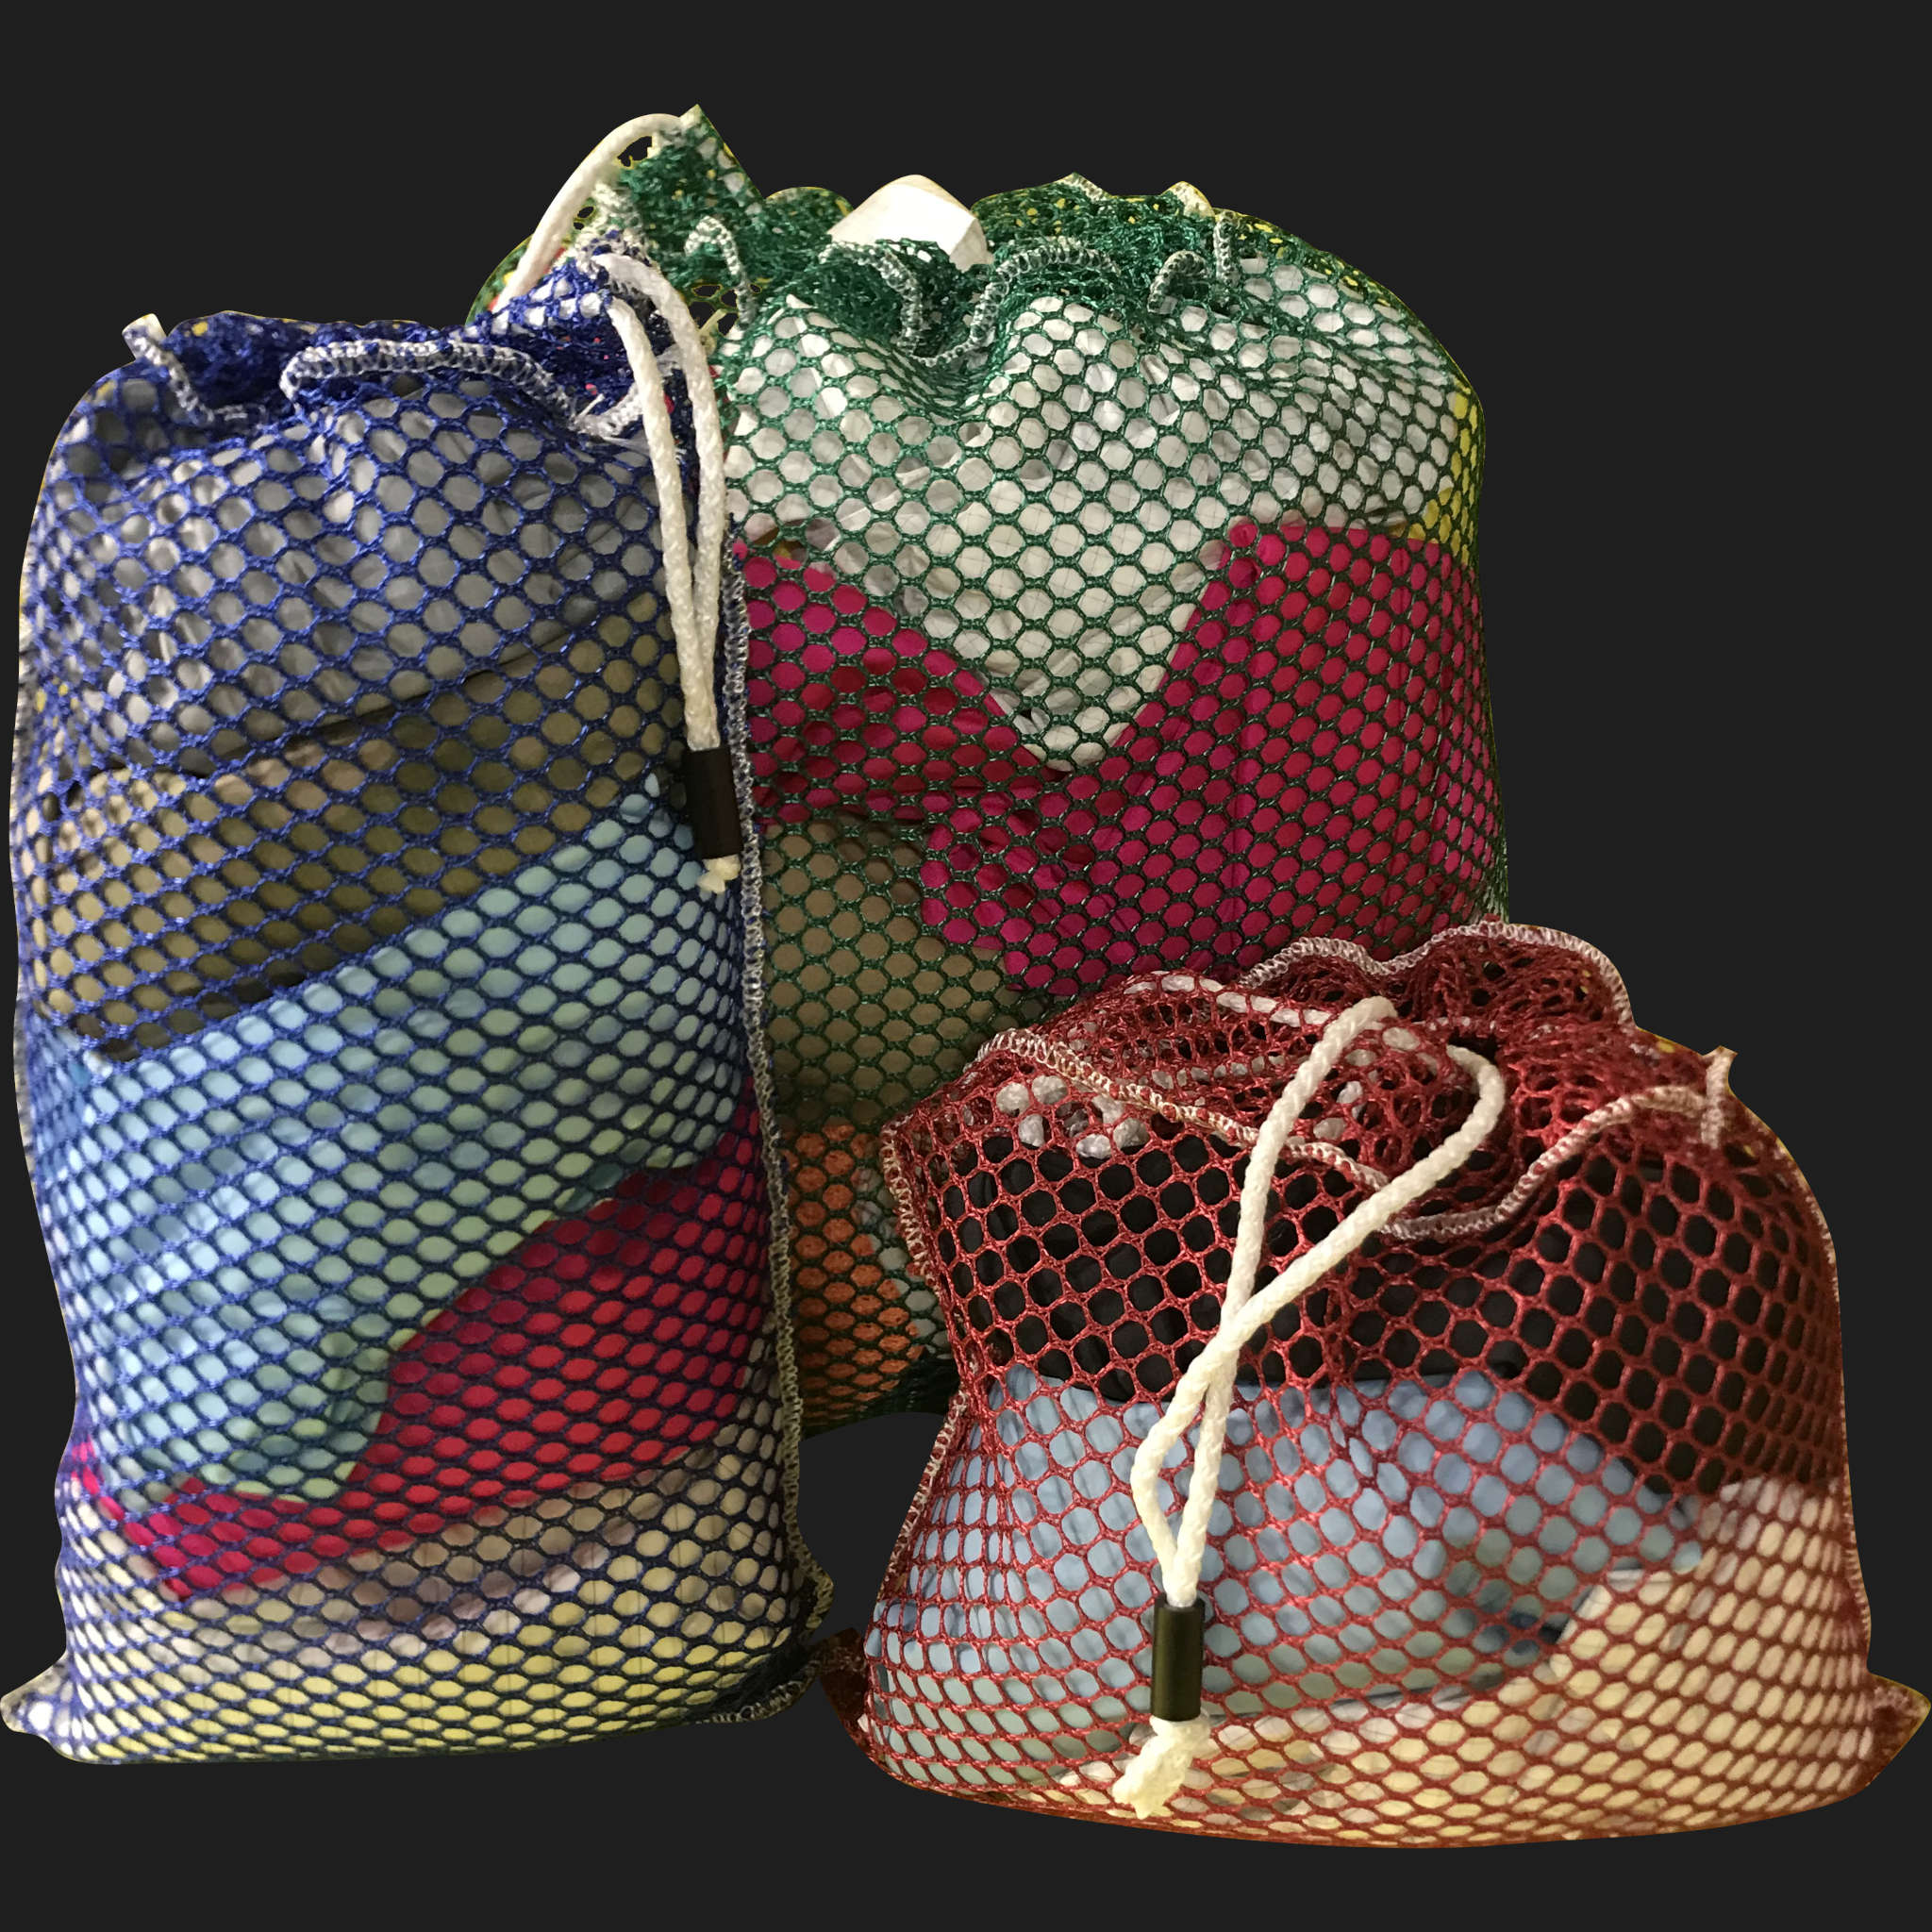 30" x 34" Customized Mesh-Net-Laundry Bags Heavy Duty with Cord and barrellock closure